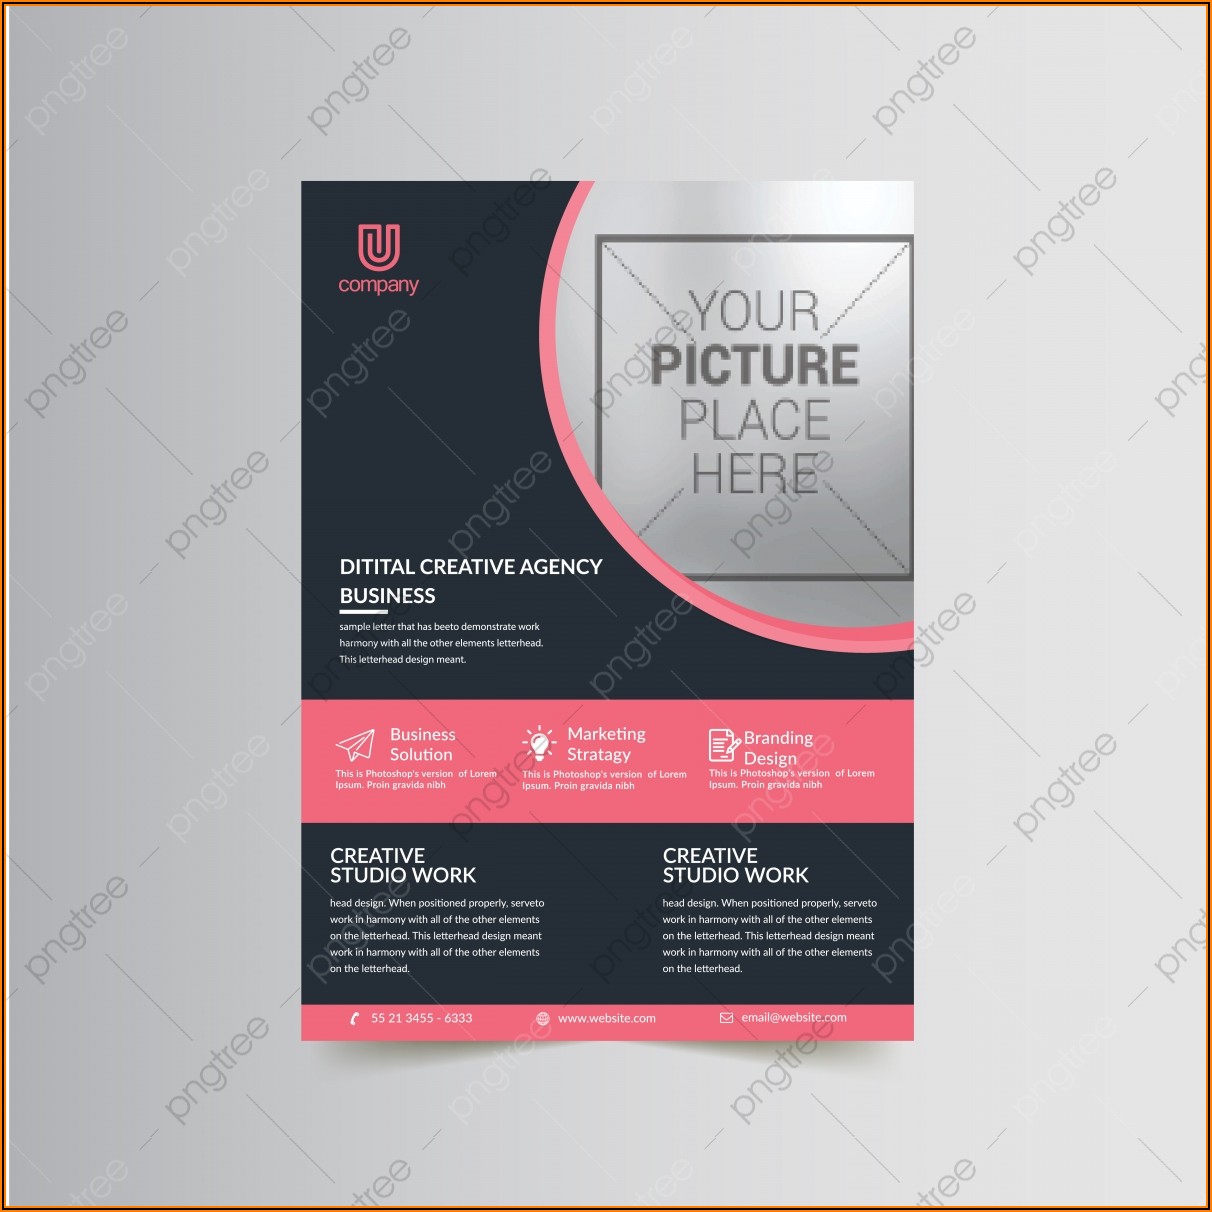 Website Proposal Template Free Download